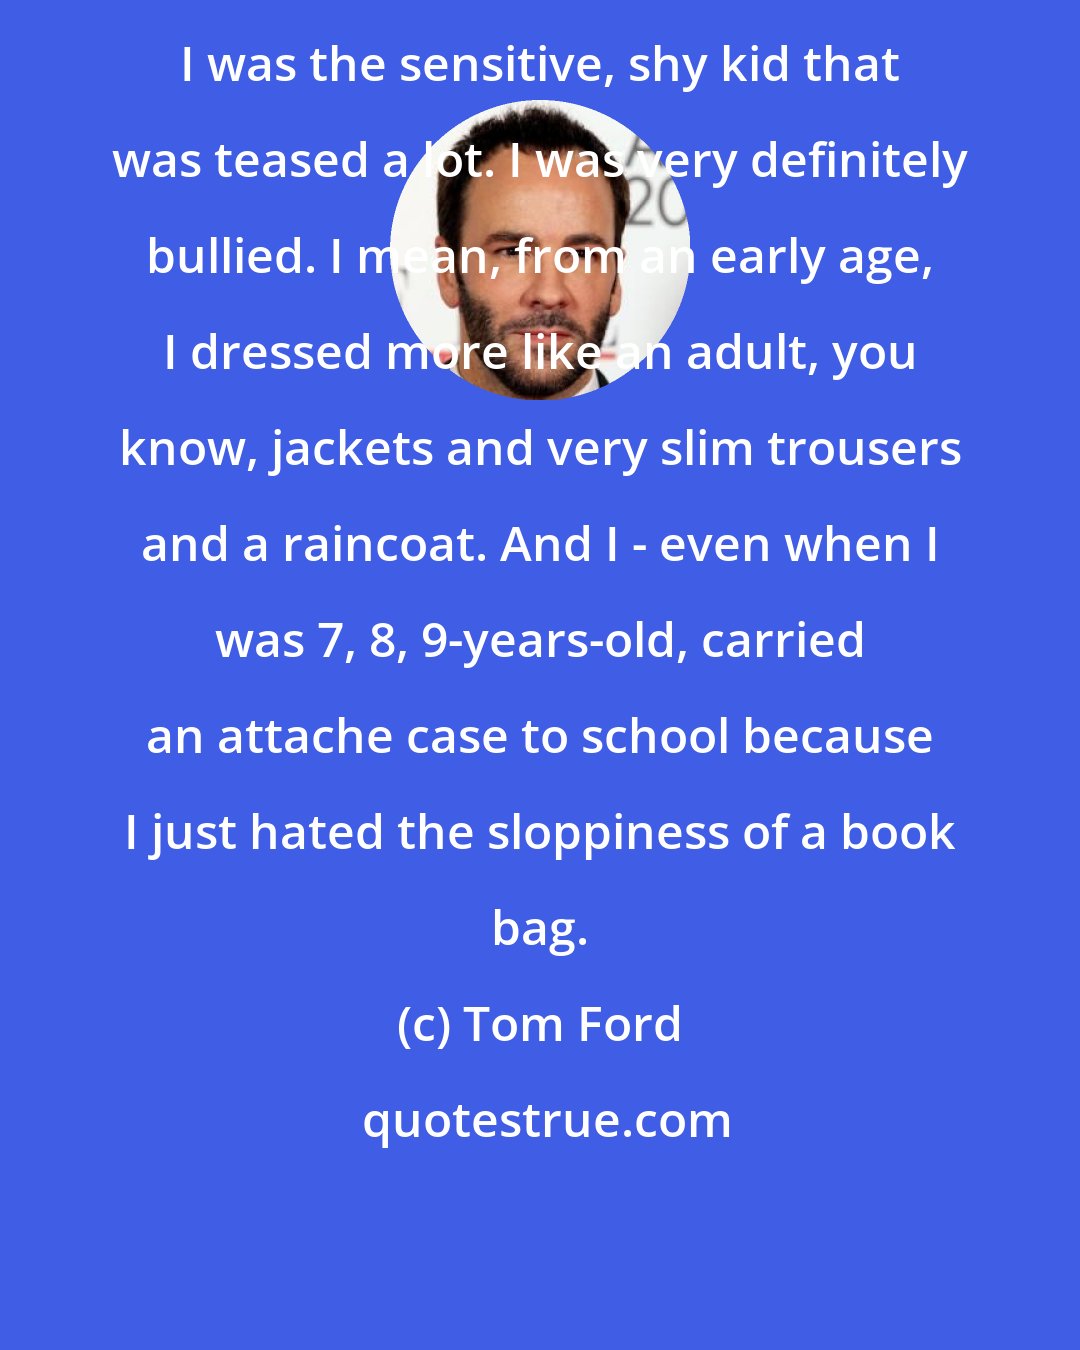 Tom Ford: I was the sensitive, shy kid that was teased a lot. I was very definitely bullied. I mean, from an early age, I dressed more like an adult, you know, jackets and very slim trousers and a raincoat. And I - even when I was 7, 8, 9-years-old, carried an attache case to school because I just hated the sloppiness of a book bag.